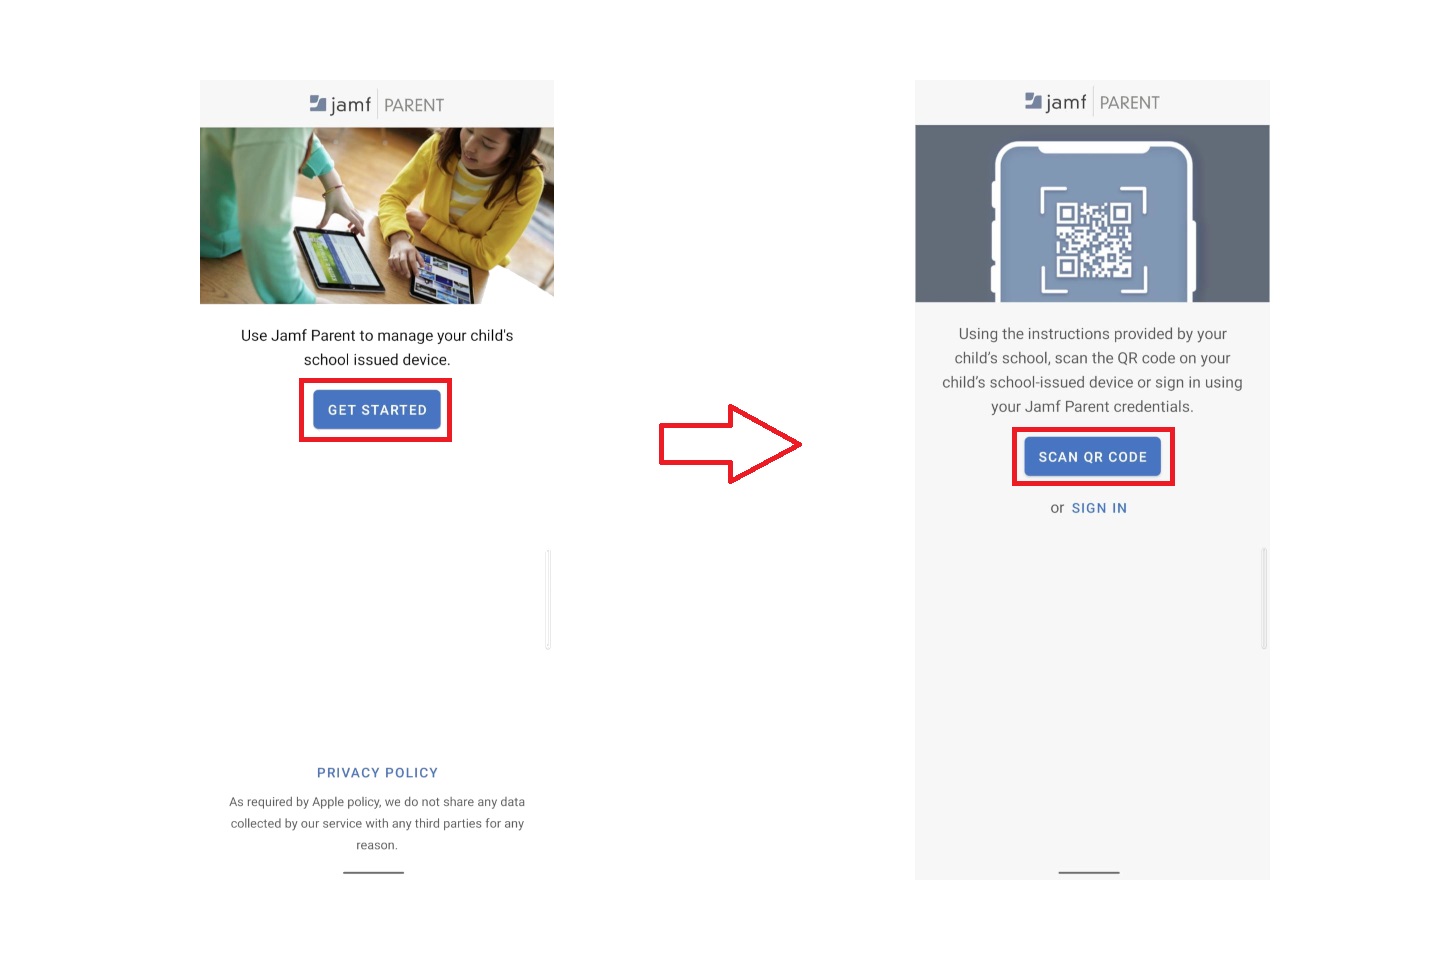 Image of two screens combined. Left Image is JAMF Parent with the Get Started button highlighted. Right image is Scan QR Code button highlighted. 